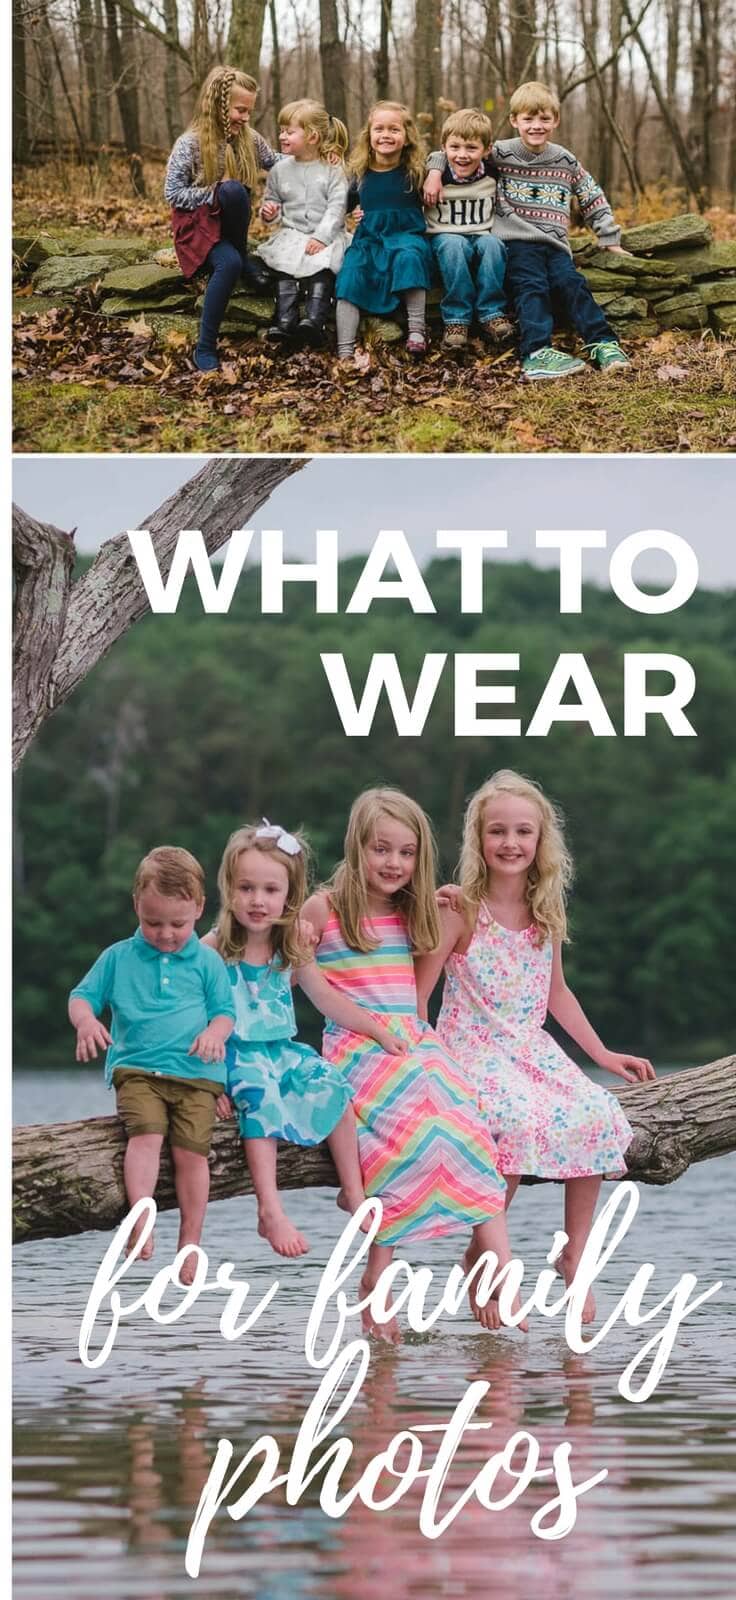 Wondering what to wear for family photos? These tips will help you choose the perfect family photo outfits!